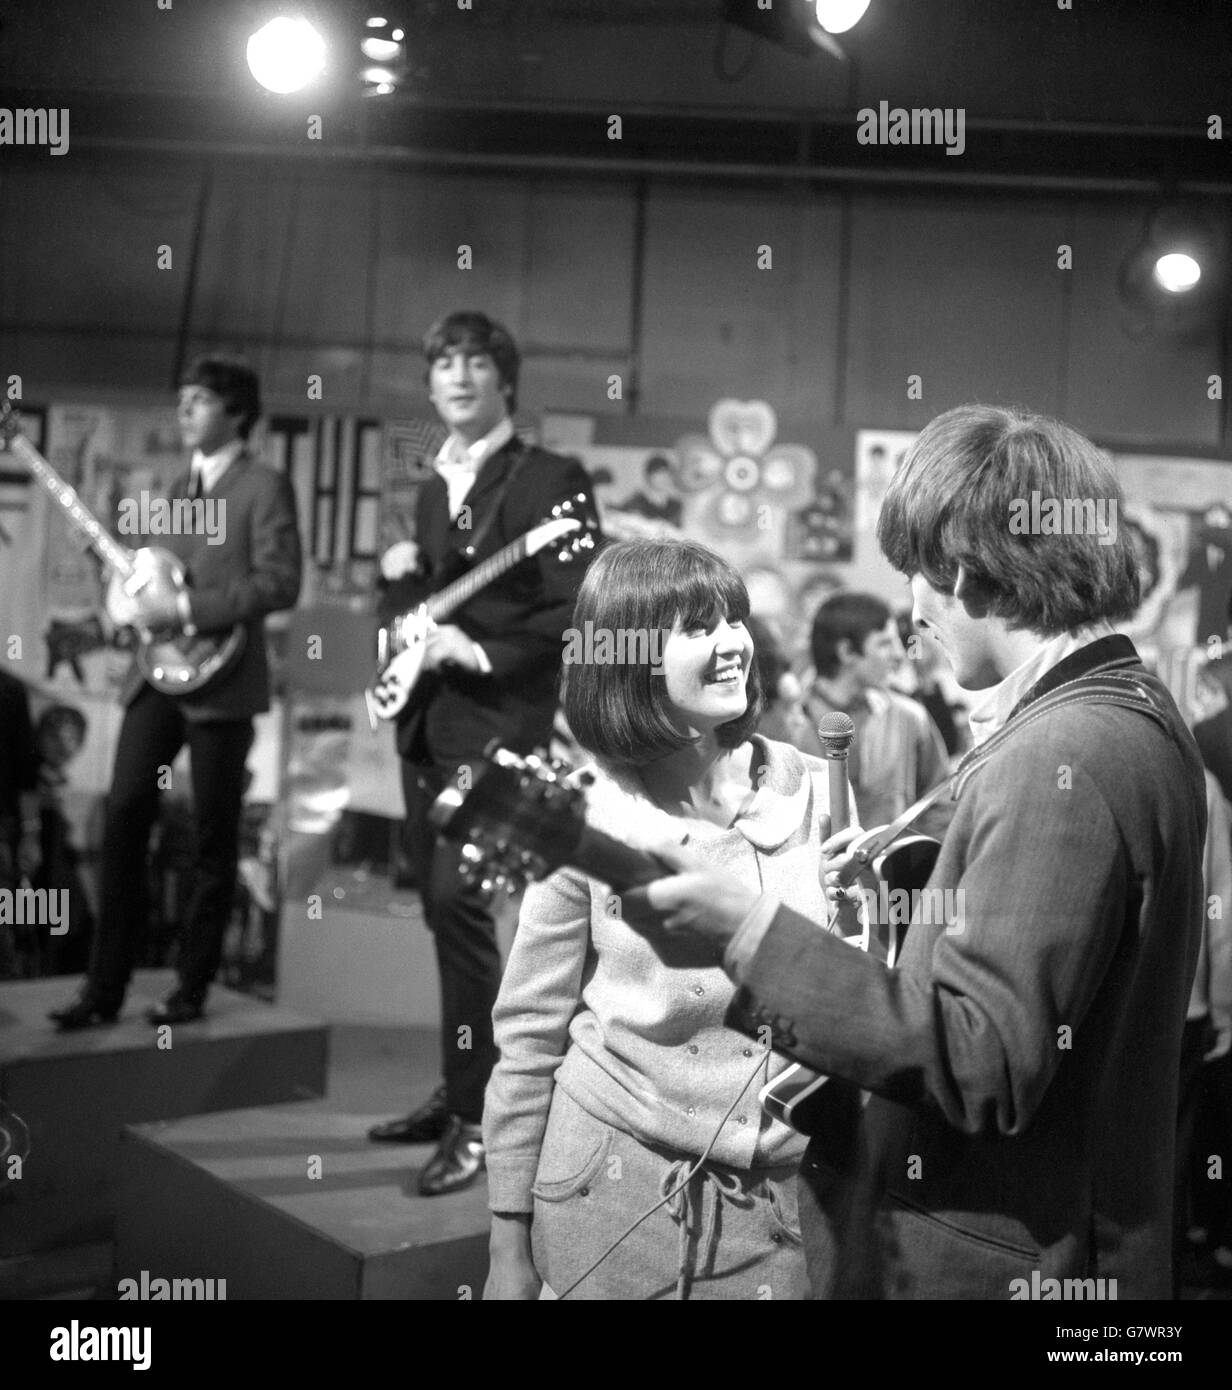 The crowds of Beatles fans outside the building had had to struggle gust to get a glimpse of their idols. But here's a girl inside Television House, Kingsway, London, who could actually talk to them - officially. She is CATHY McGOWAN, teenage adviser to the Independent television pop programme 'Ready, Steady, Go', and is seen interviewing GEORGE HARRISON at the rehearsal which preceded The Beatles' appearance. The two members of the group seen in background are PAUL McCARTNEY (left) and JOHN LENNON. Stock Photo